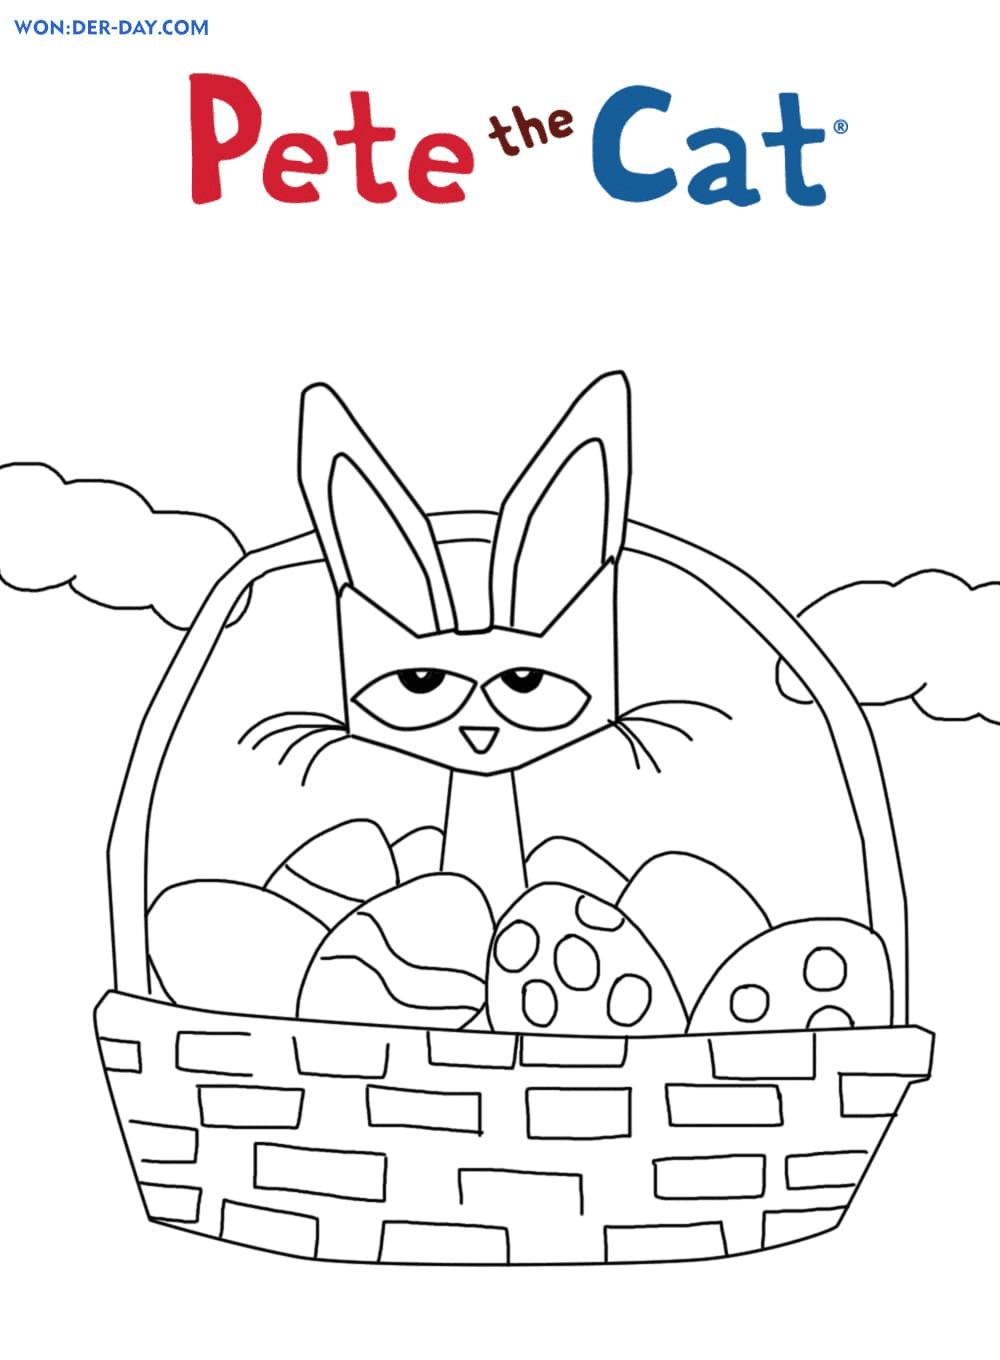 Pete the Cat Easter Coloring Pages